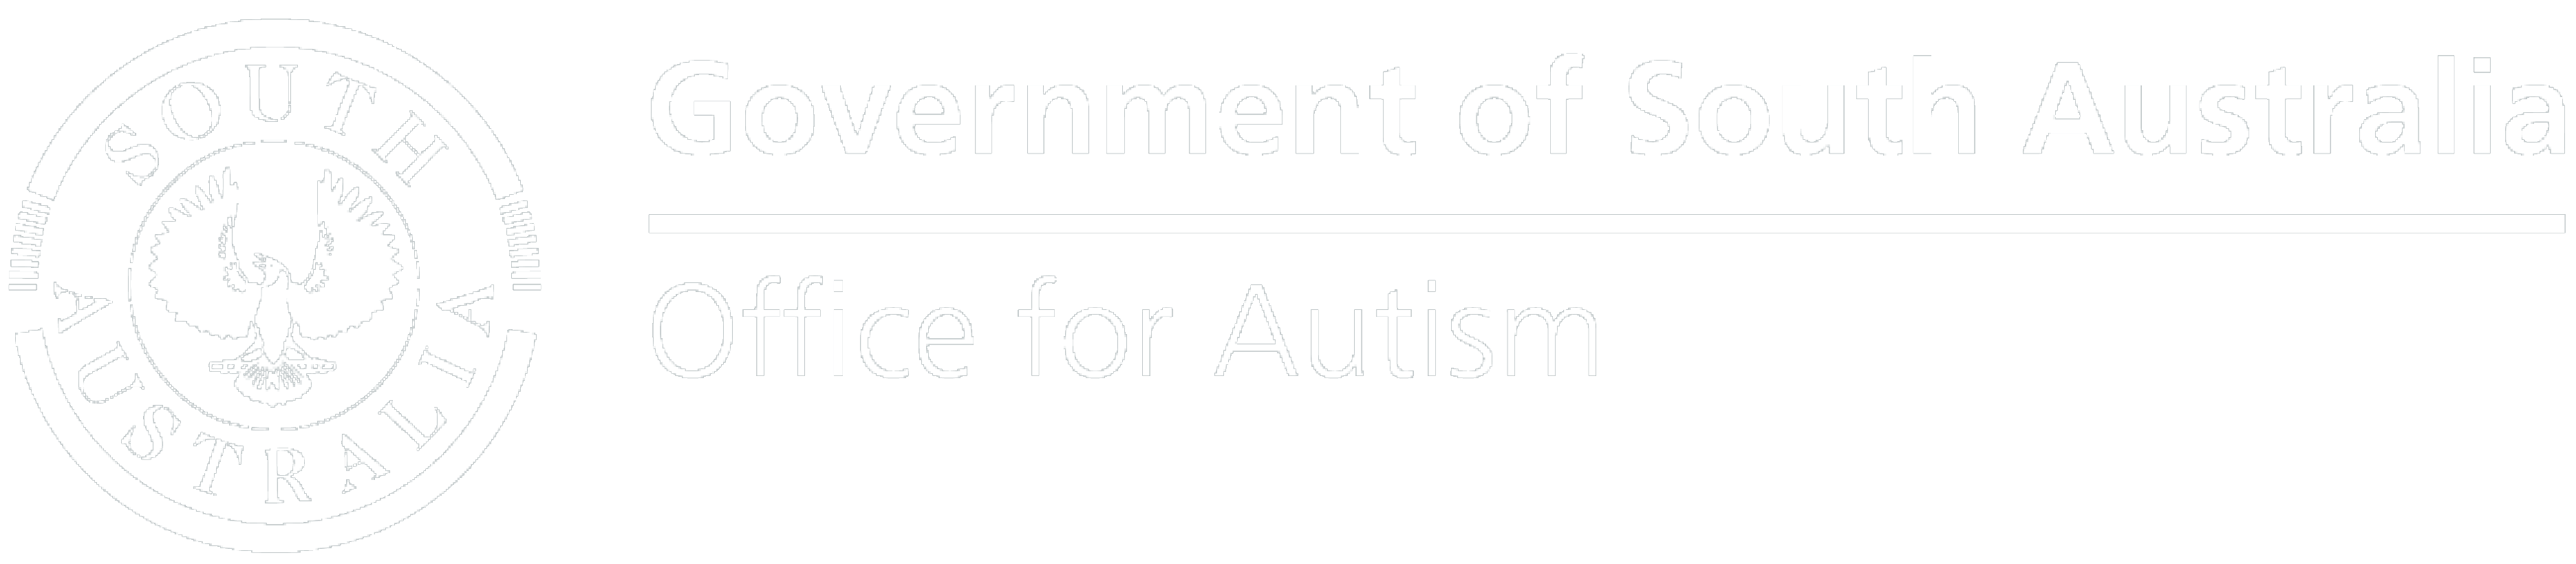 Government of South Australia Office for Autism Logo - Home